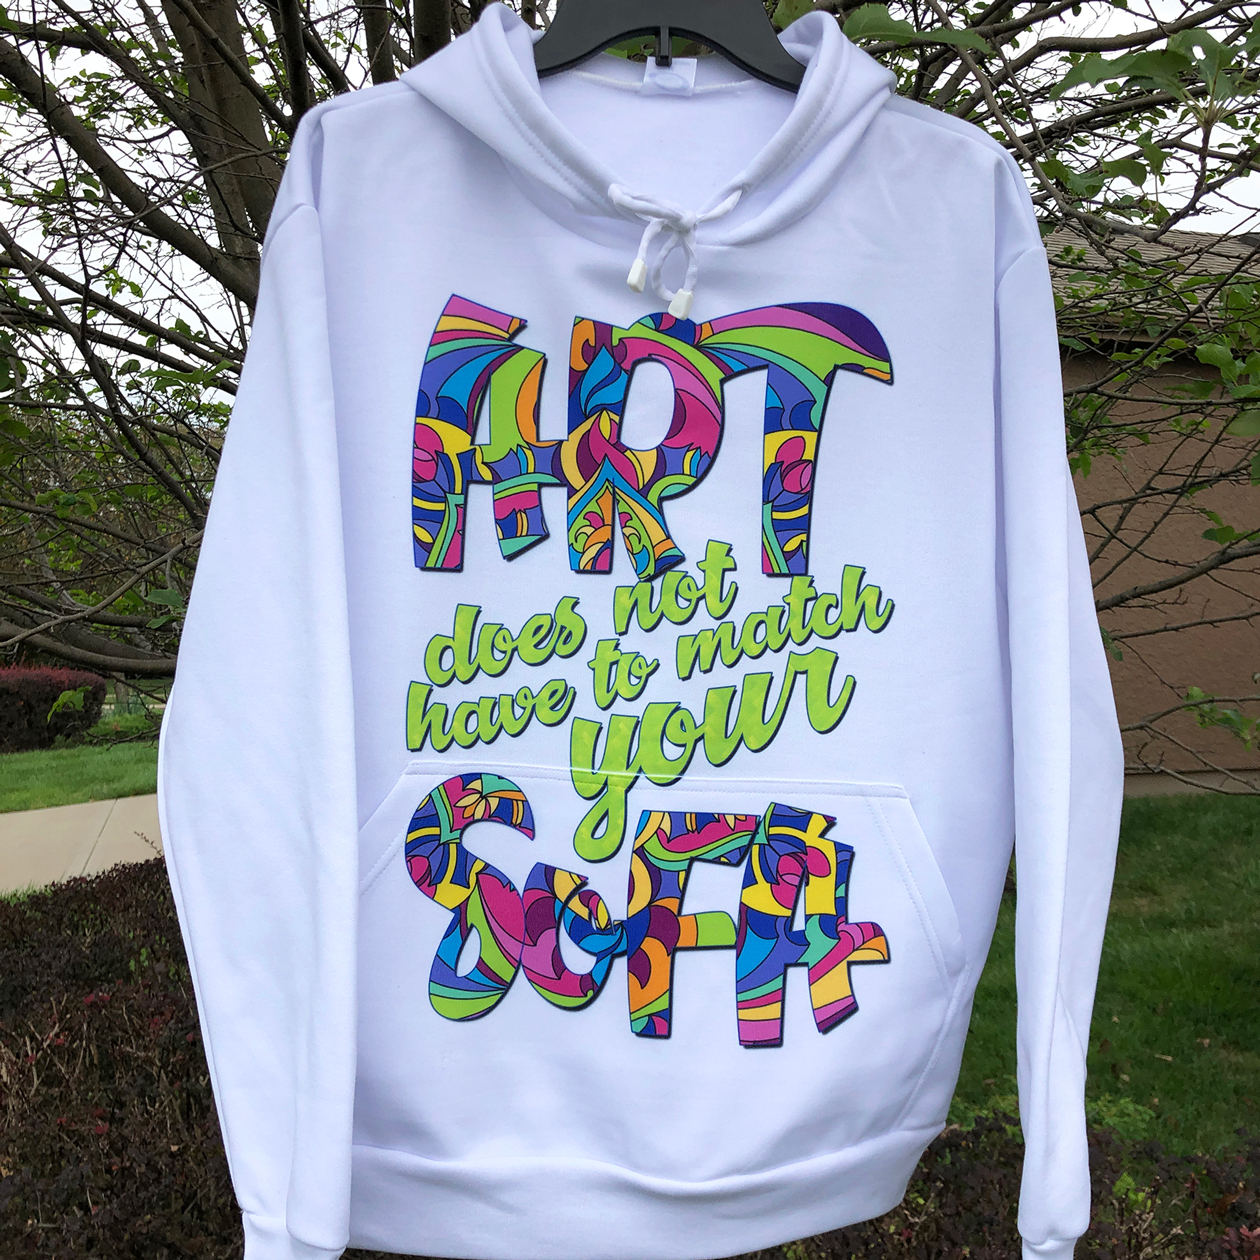 True Statement! made with sublimation printing